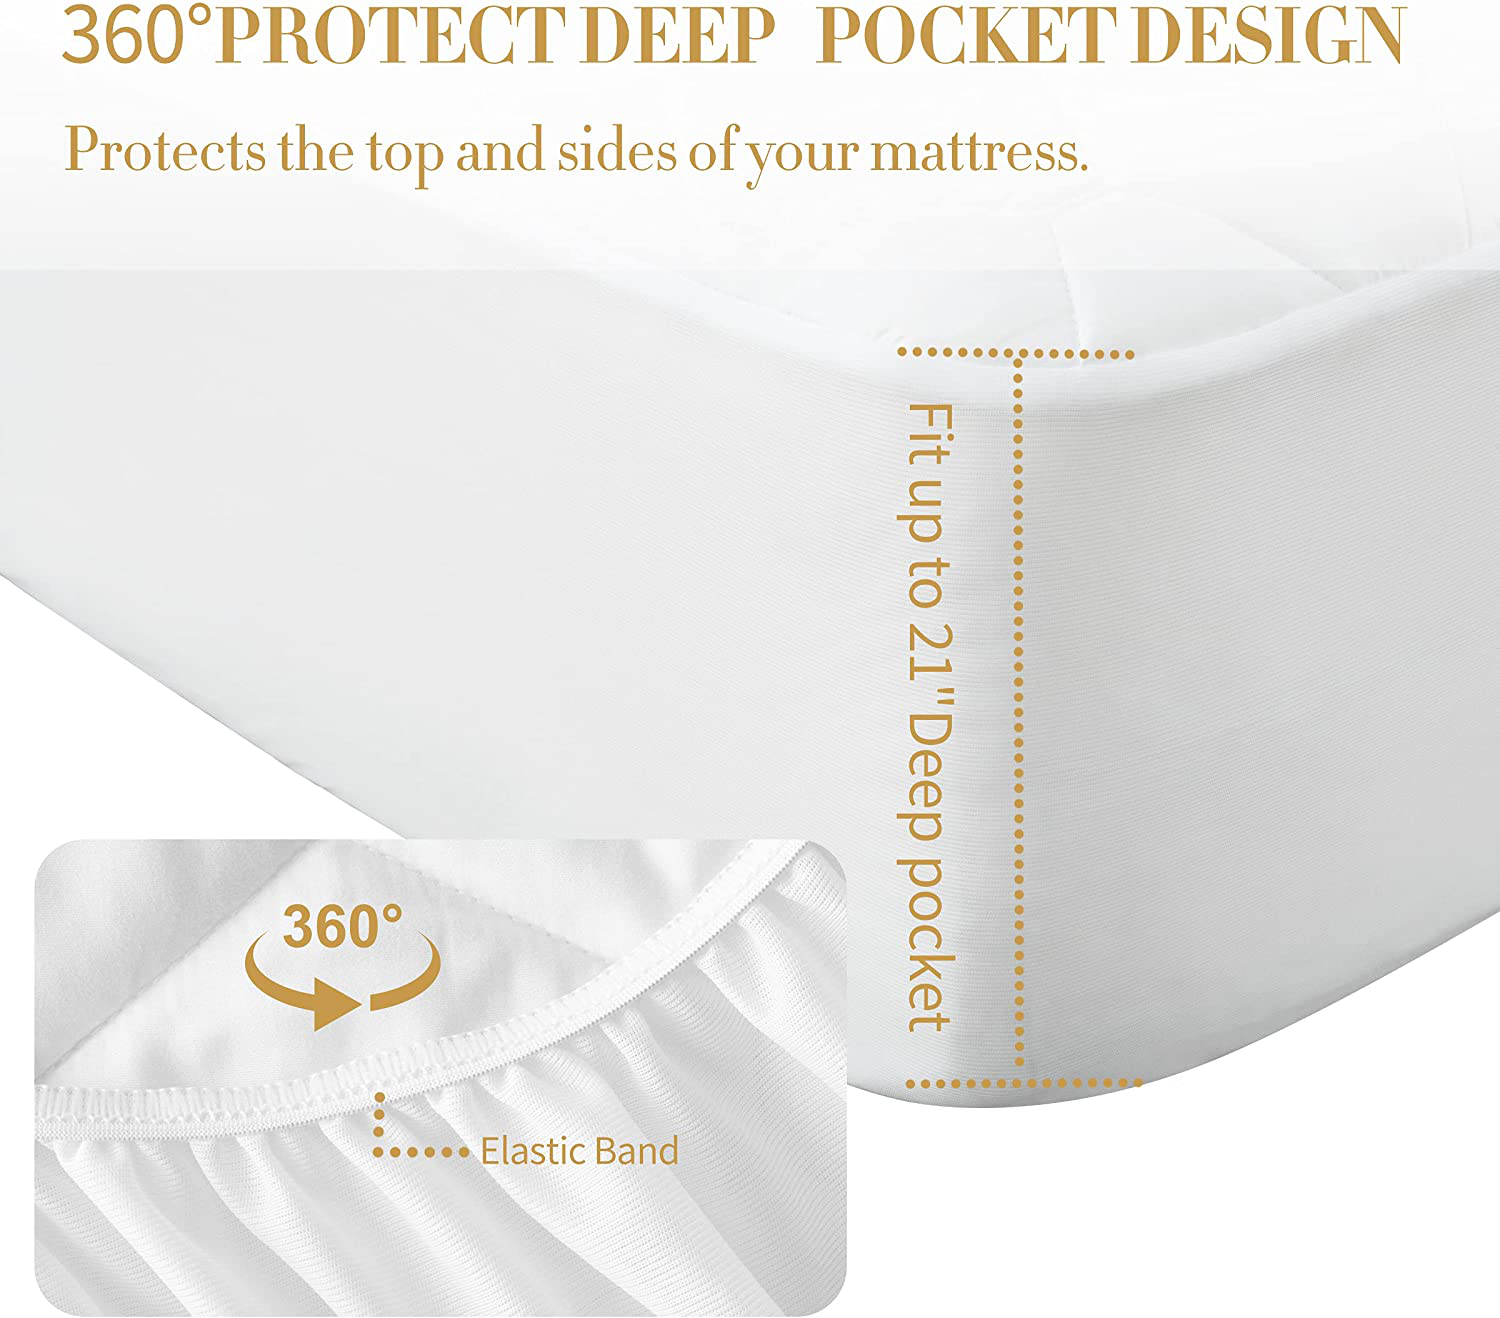 Twin Size Quilted Fitted Mattress Pad, 100% Waterproof Breathable Mattress Protector, Ultra Soft Alternative Filling Mattress Cover, Stretches up to 21 Inches Deep Pocket (White)